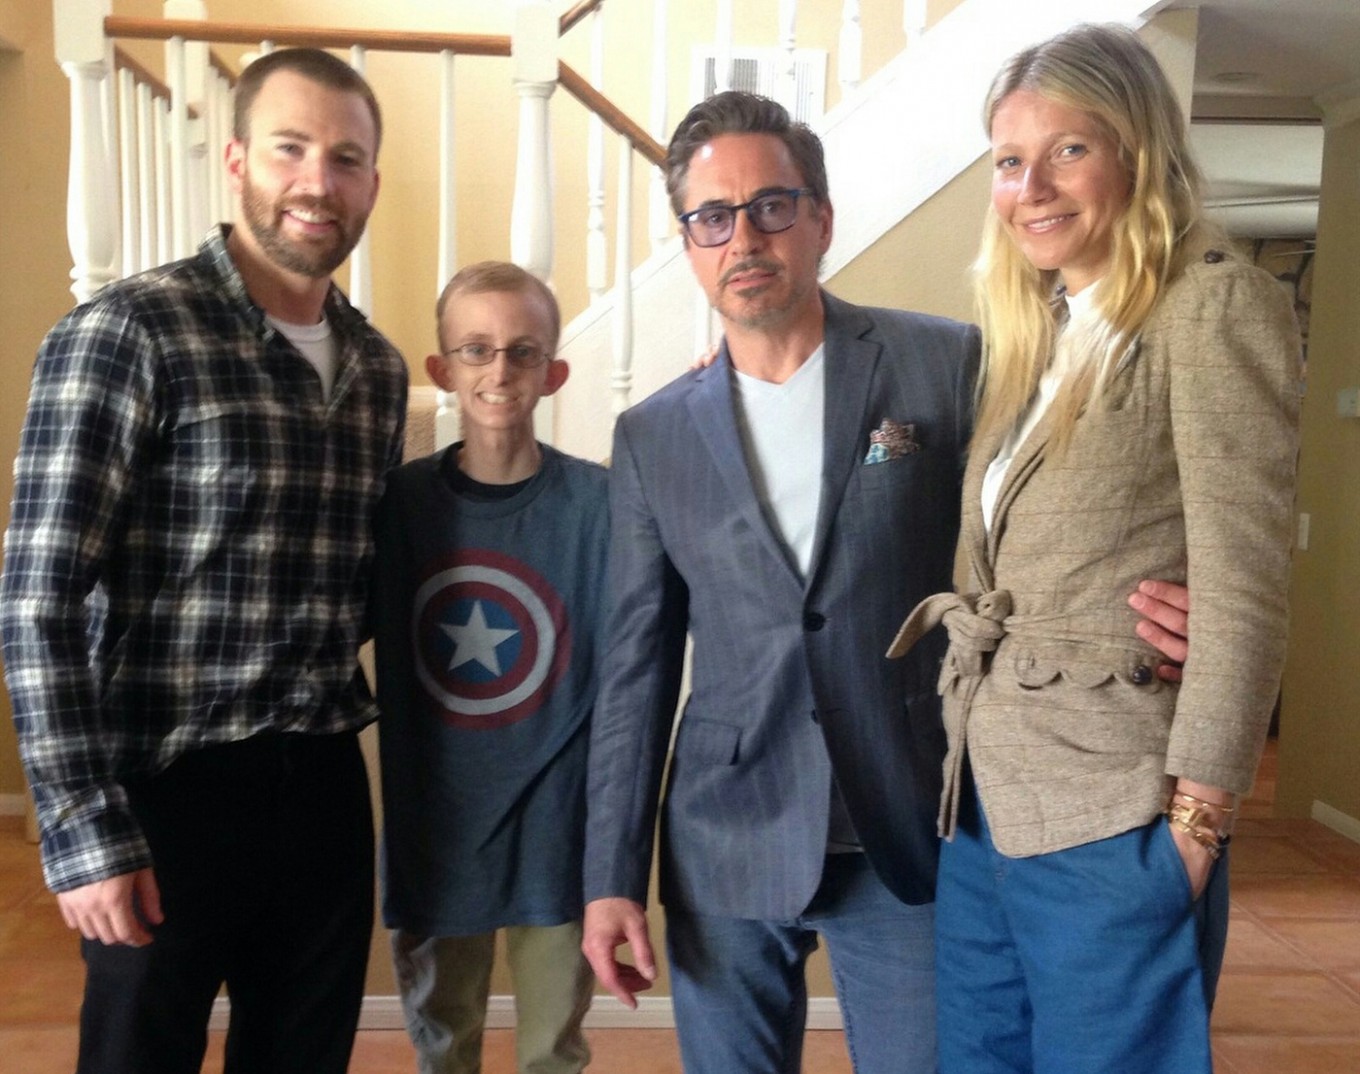 The Avengers heed call to visit teen battling cancer 